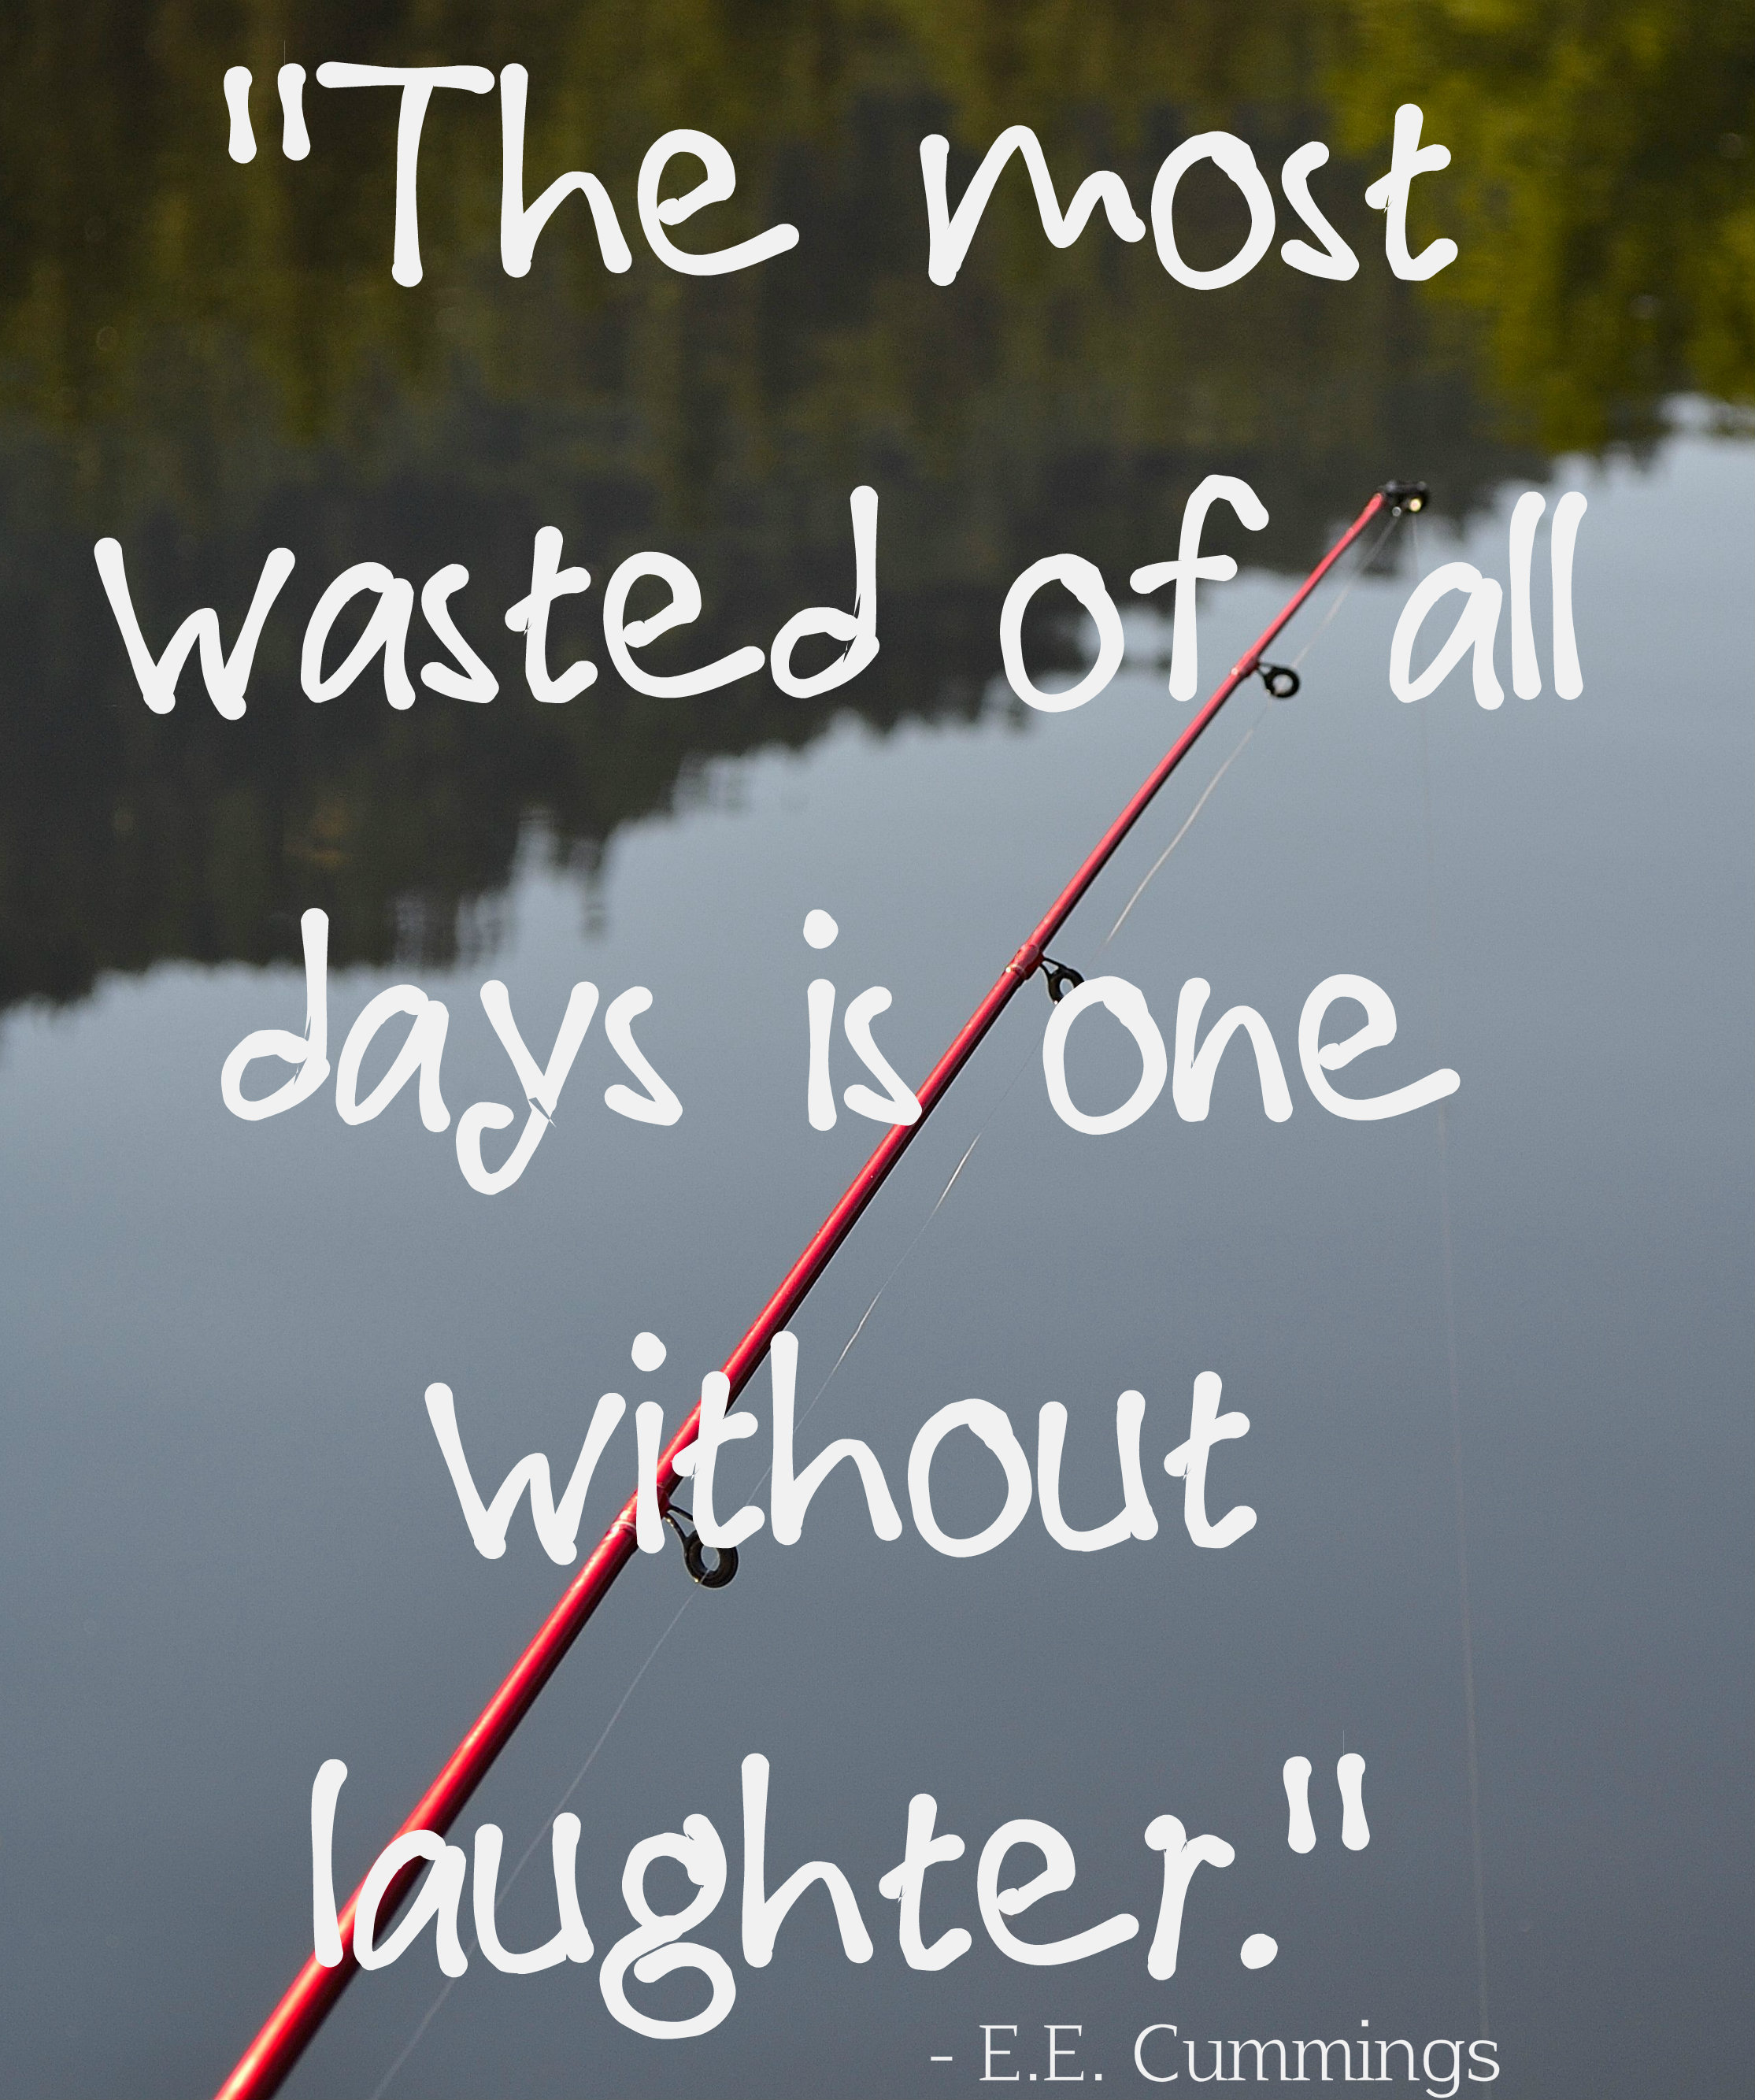 "The most wasted of all days is one without laughter." - E.E Cummings #inspirational #quotes